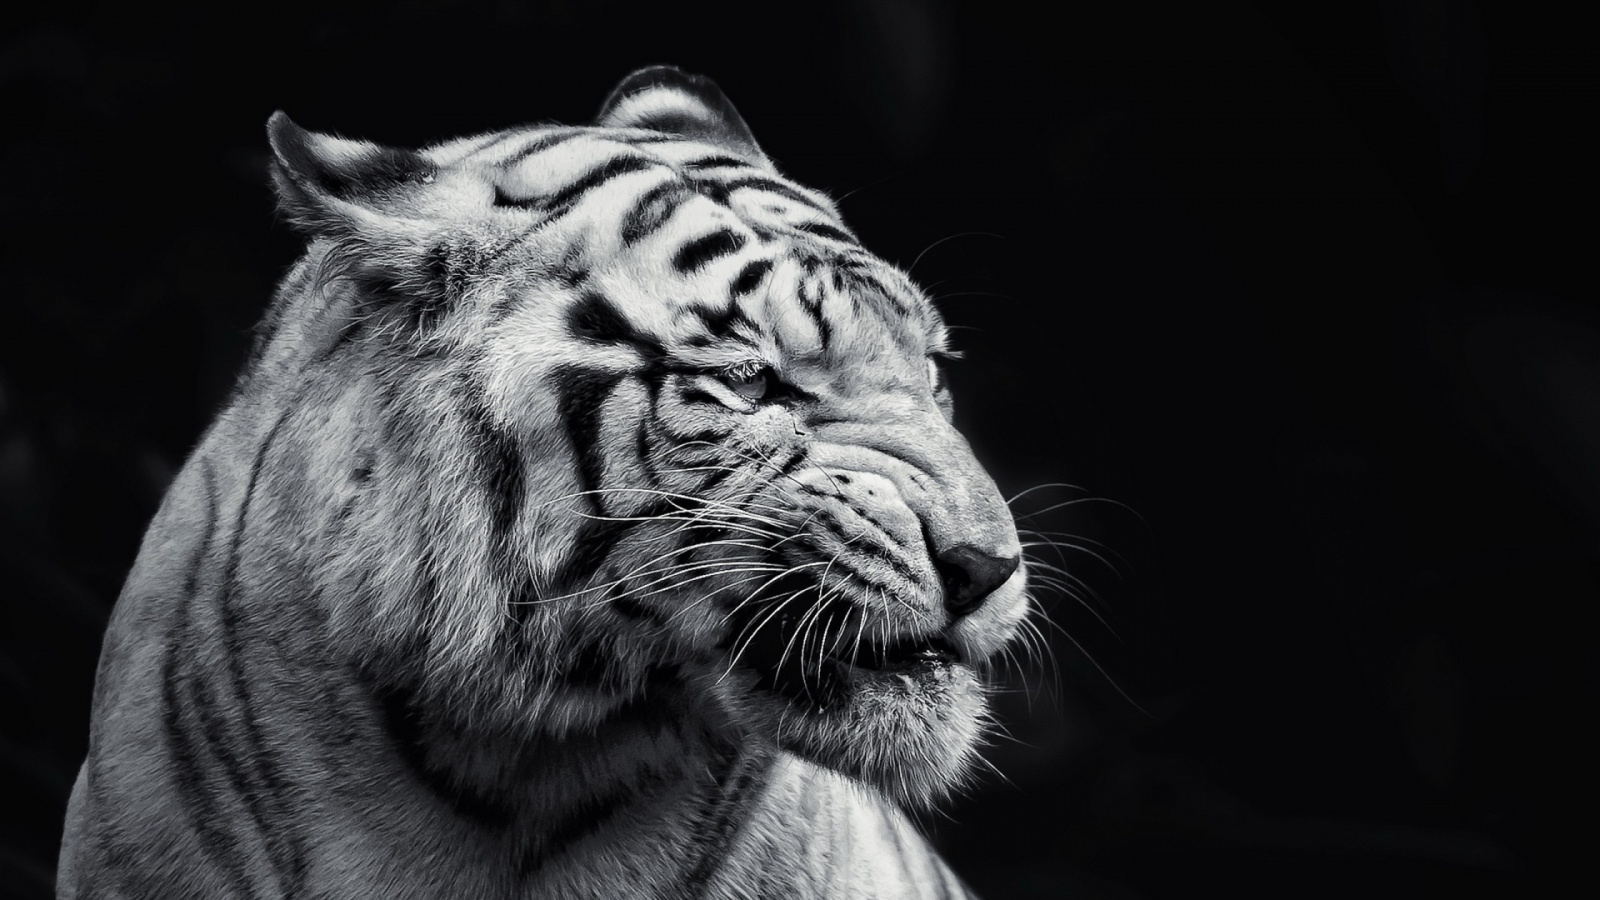 Free Downloadhd Backgrounds - Tiger Black And White - HD Wallpaper 